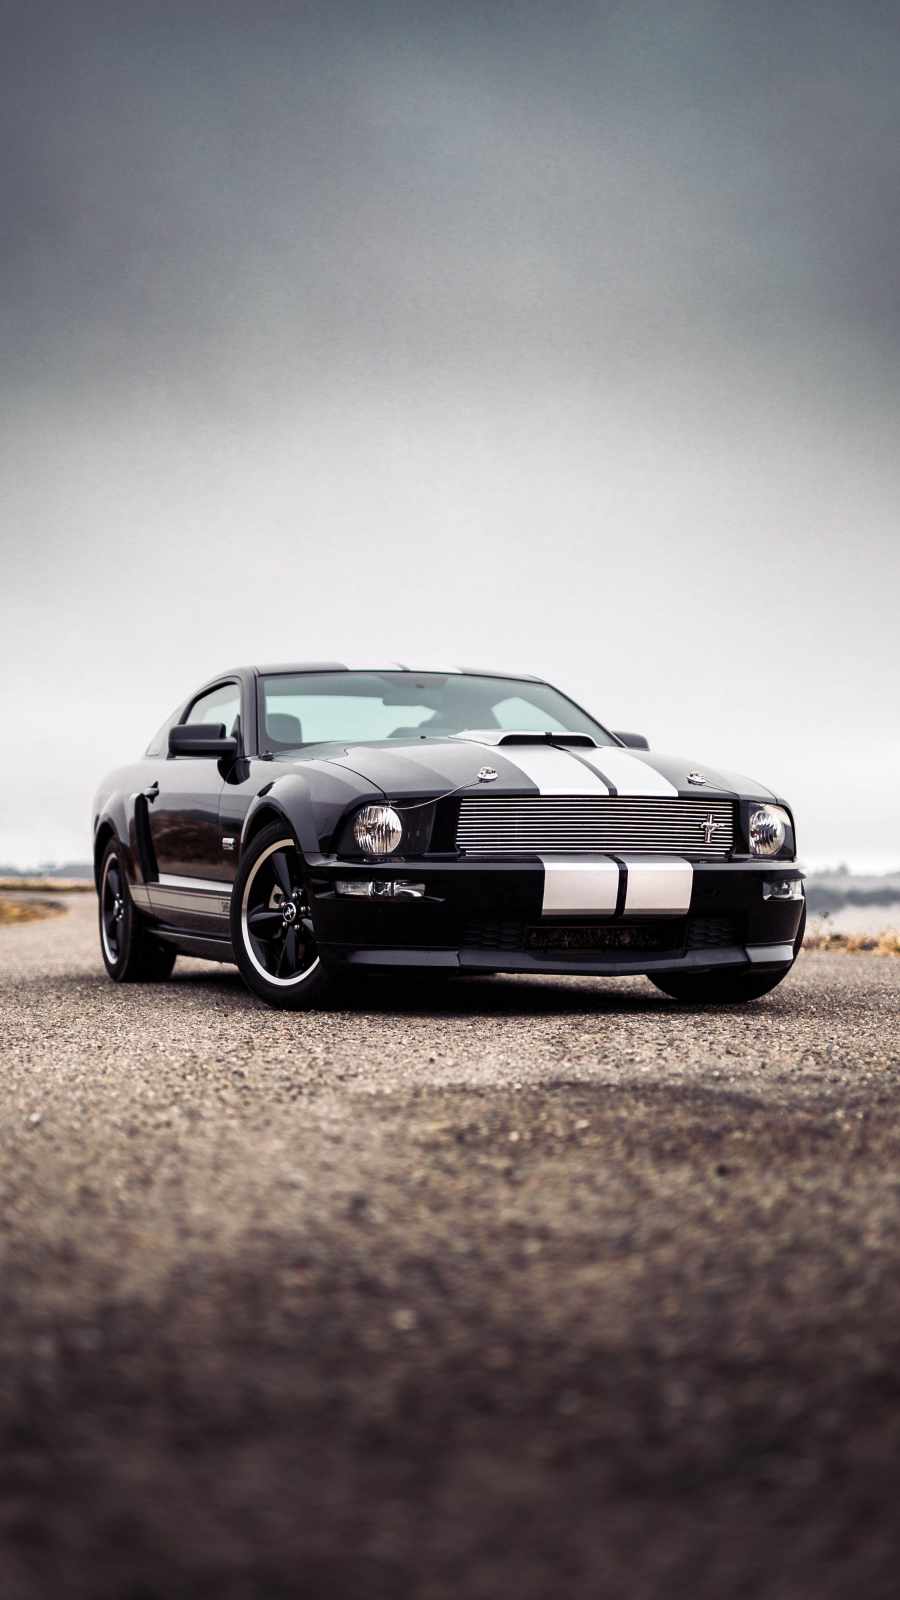 Ford Mustang Classic